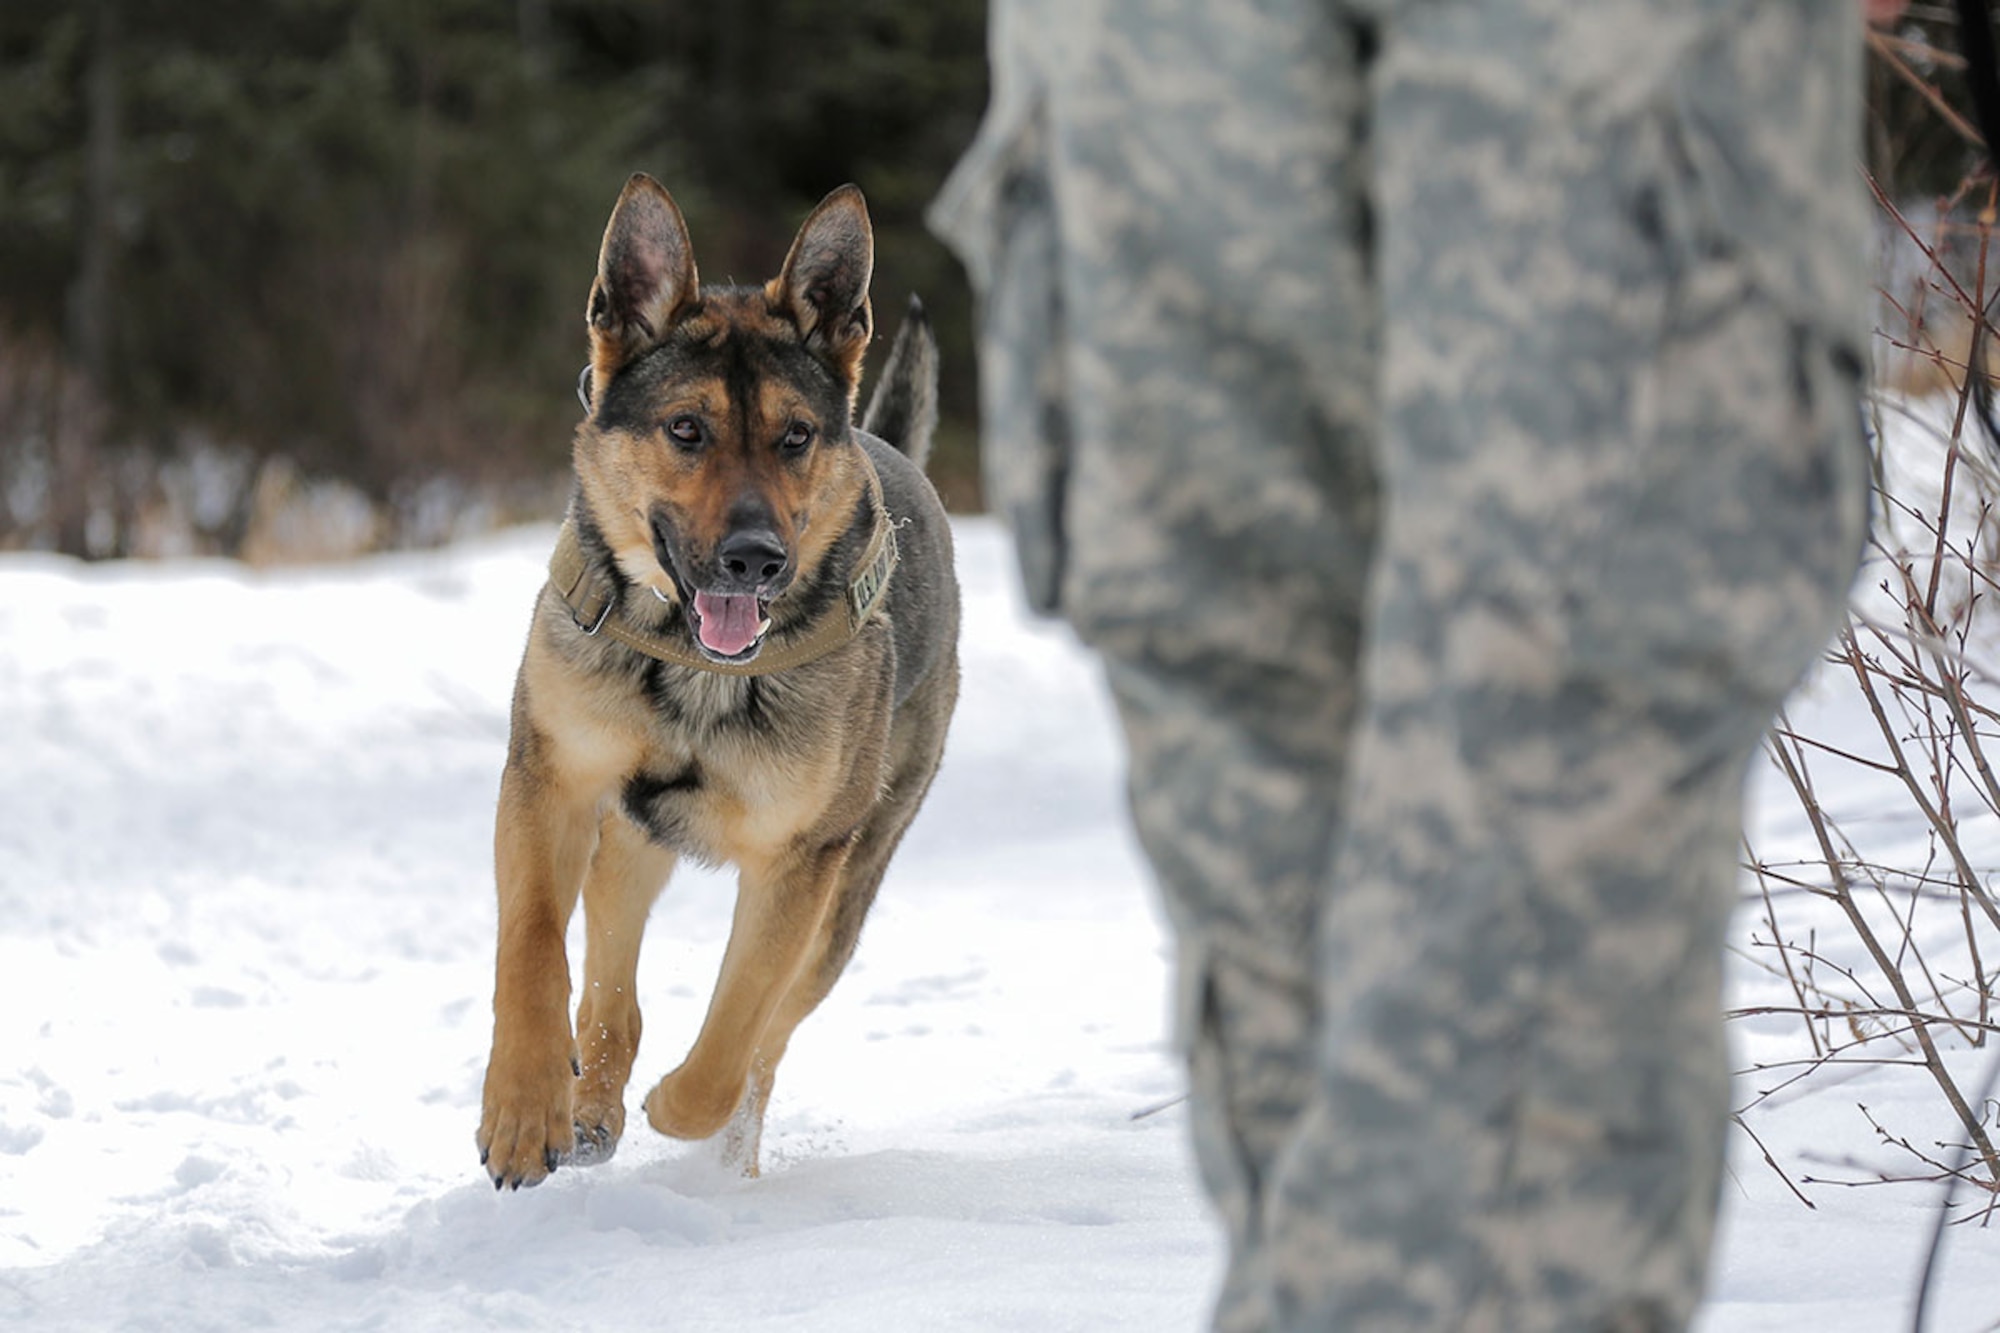 U.S. Army military working dog, Faro, assigned to the 549th Military Working Dog Detachment, searches for simulated hidden explosives while conducting K-9 training at Joint Base Elmendorf-Richardson, Alaska, March 17, 2016. Military working dogs are trained to respond to various law enforcement emergencies as well as detect hidden narcotics and explosives. (U.S. Air Force photo/Alejandro Peña)